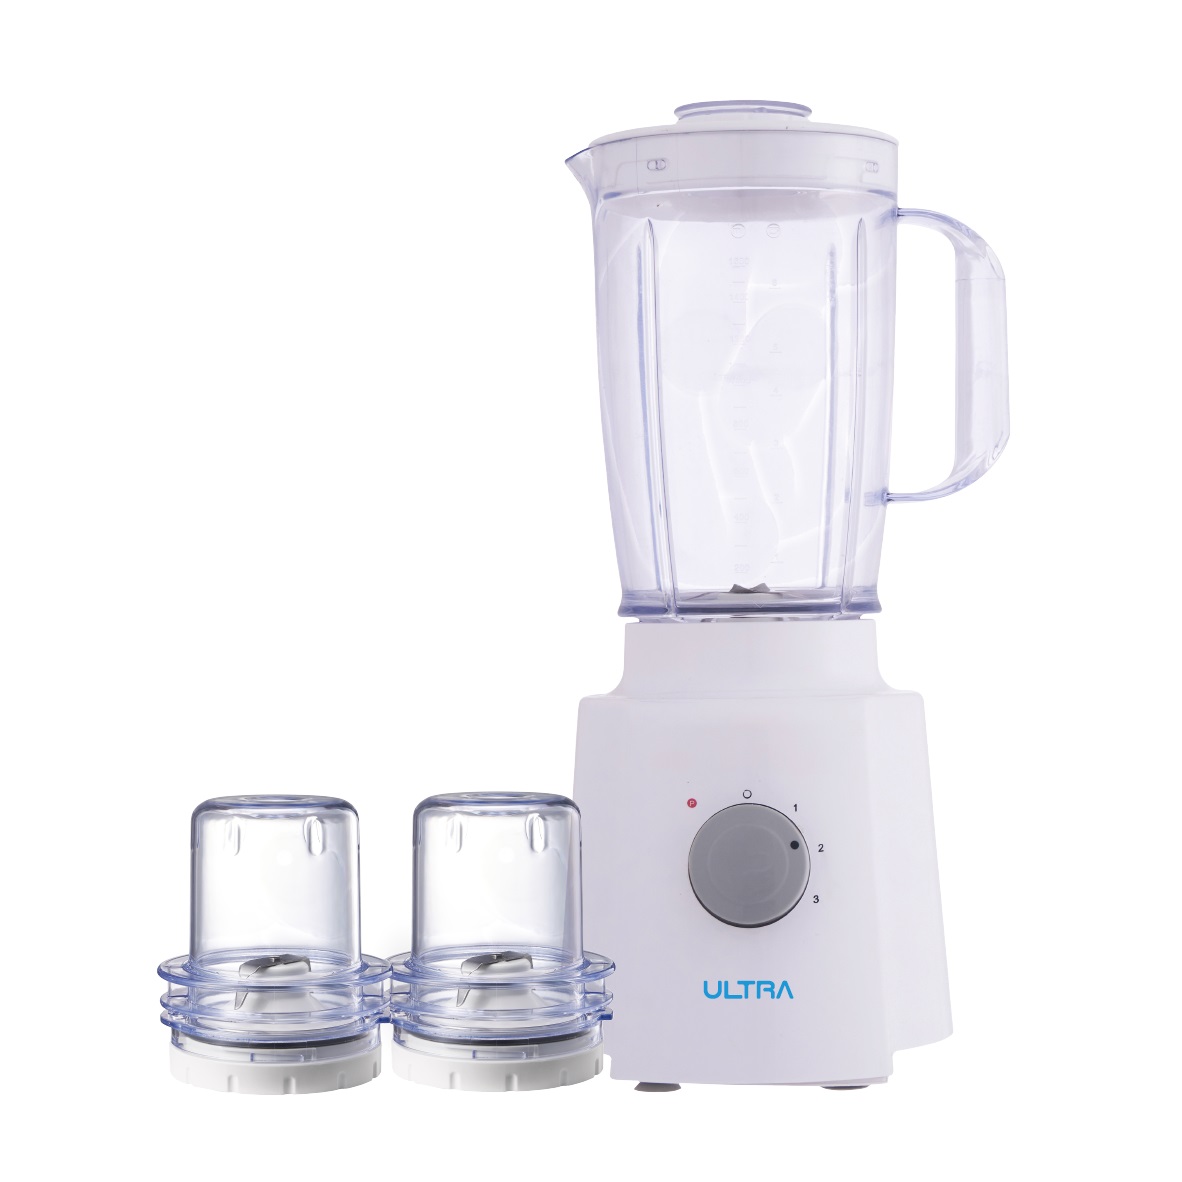 Ultra Countertop Blender with Attachments, 1.6 Liters, 600W, White - UB60M2WE